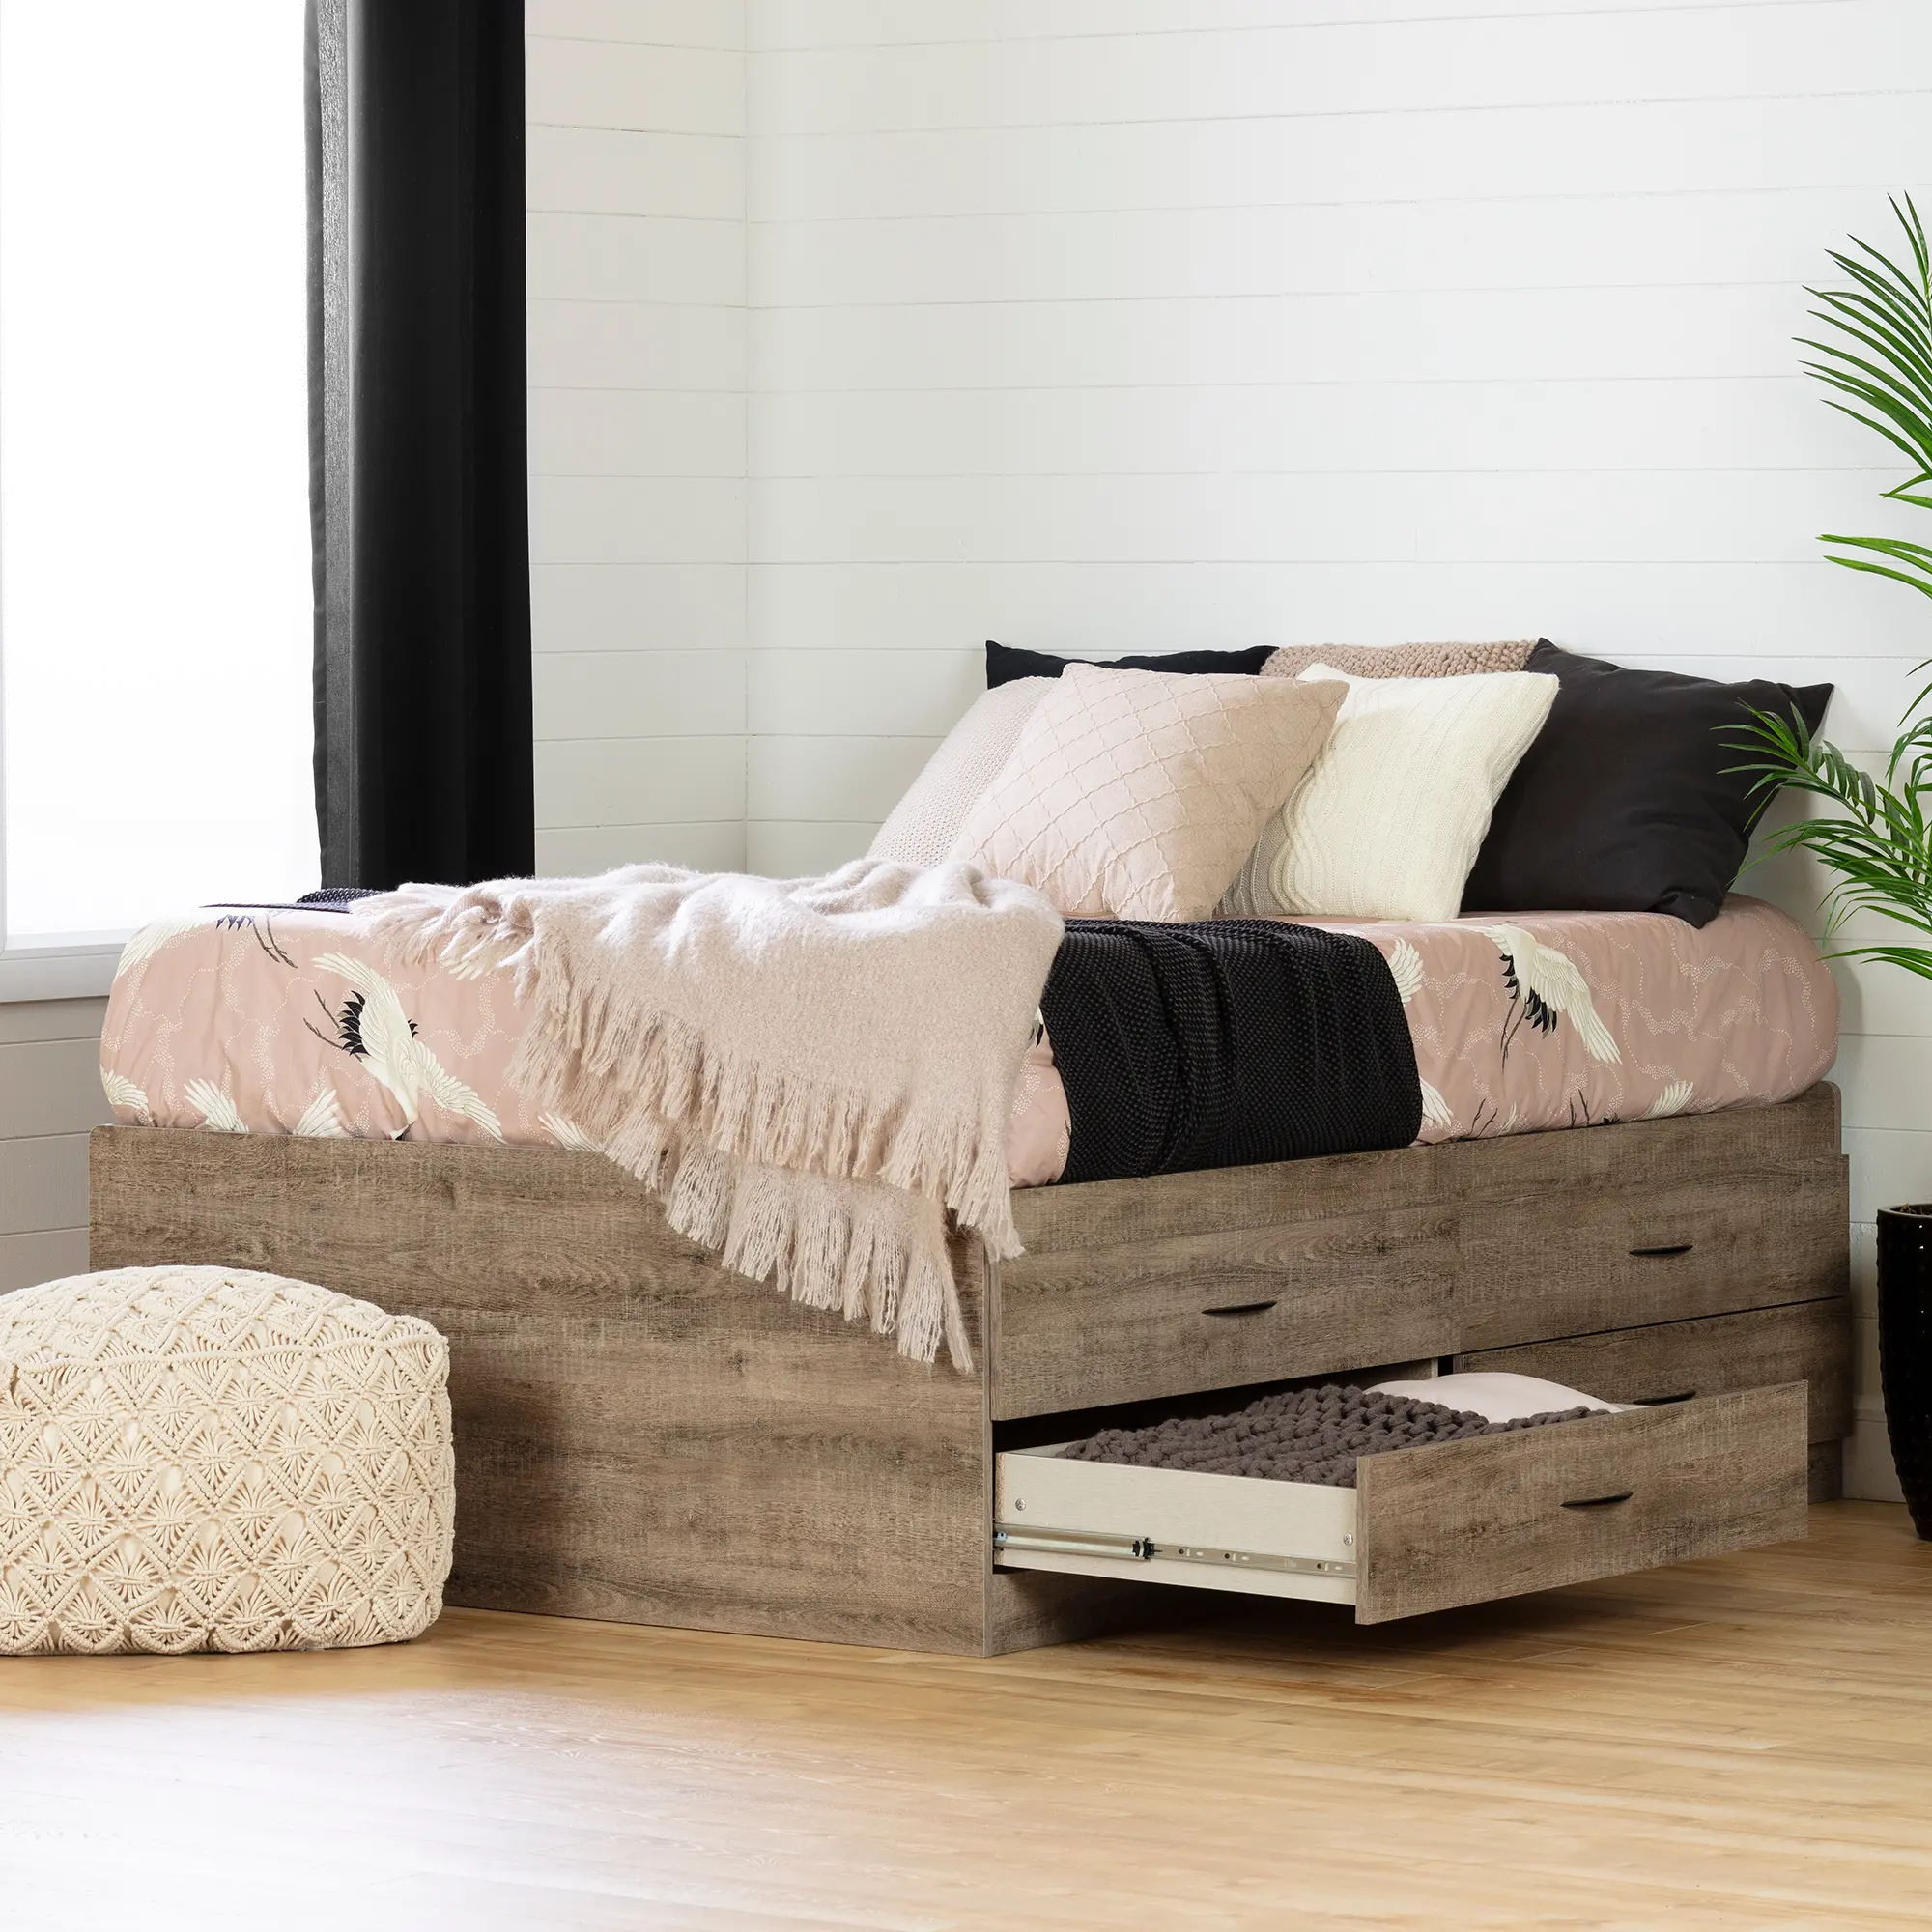 12953 Weathered Oak Full Storage Bed with 4 Drawers - So sku 12953